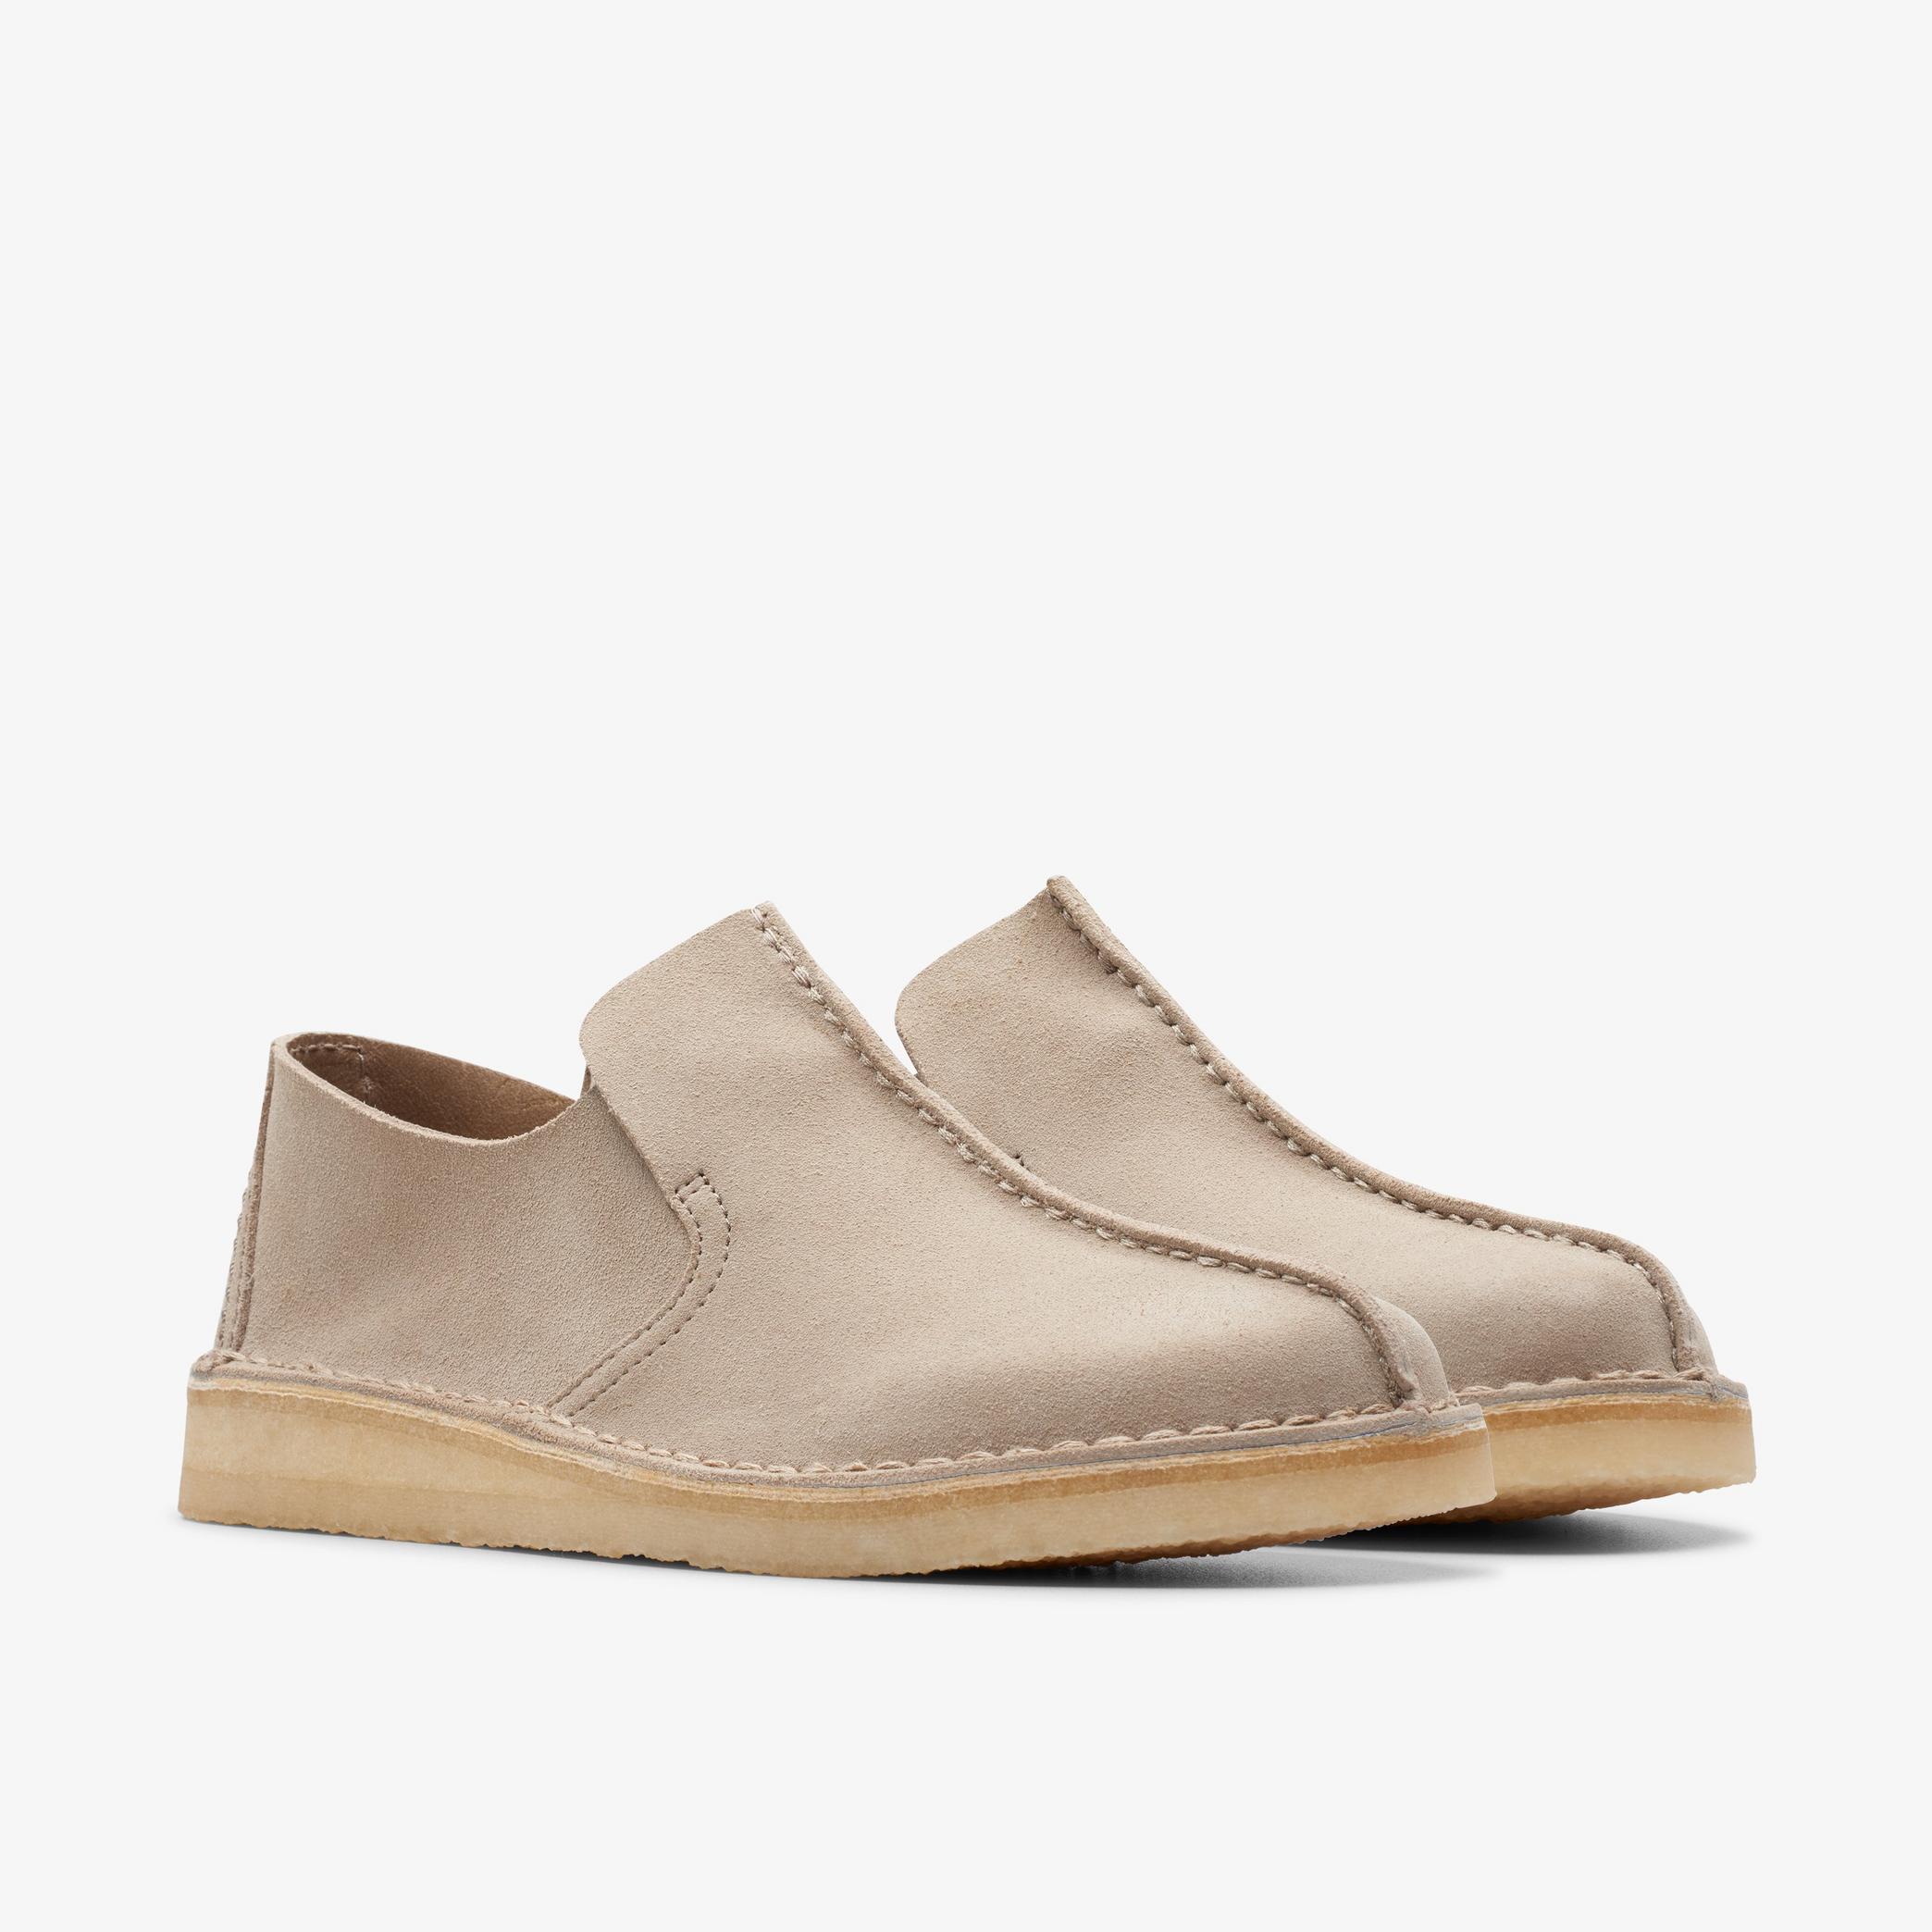 Desert Mosier Sand Suede Loafers, view 4 of 6